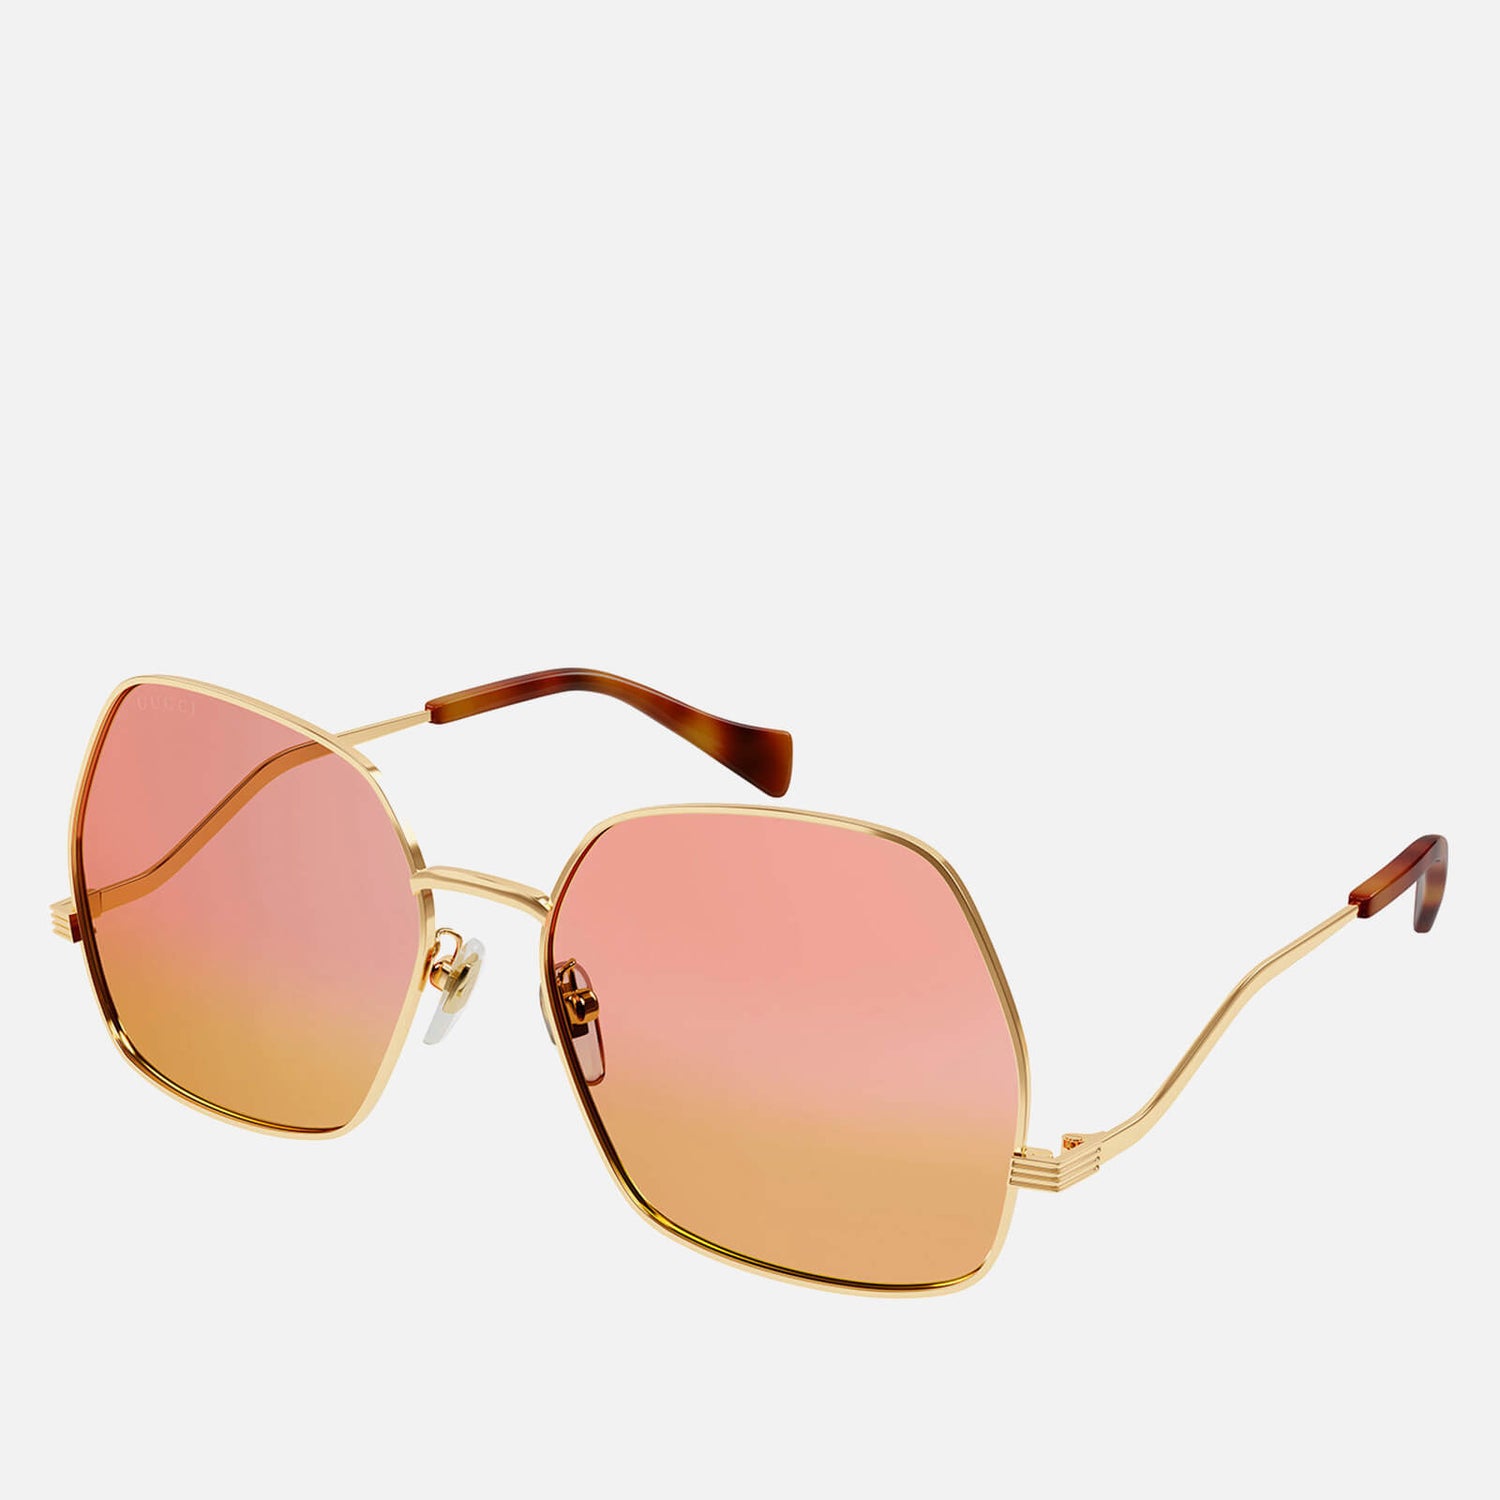 Gucci Women's Over Sized Metal Frame Wave Sunglasses - Gold/Pink